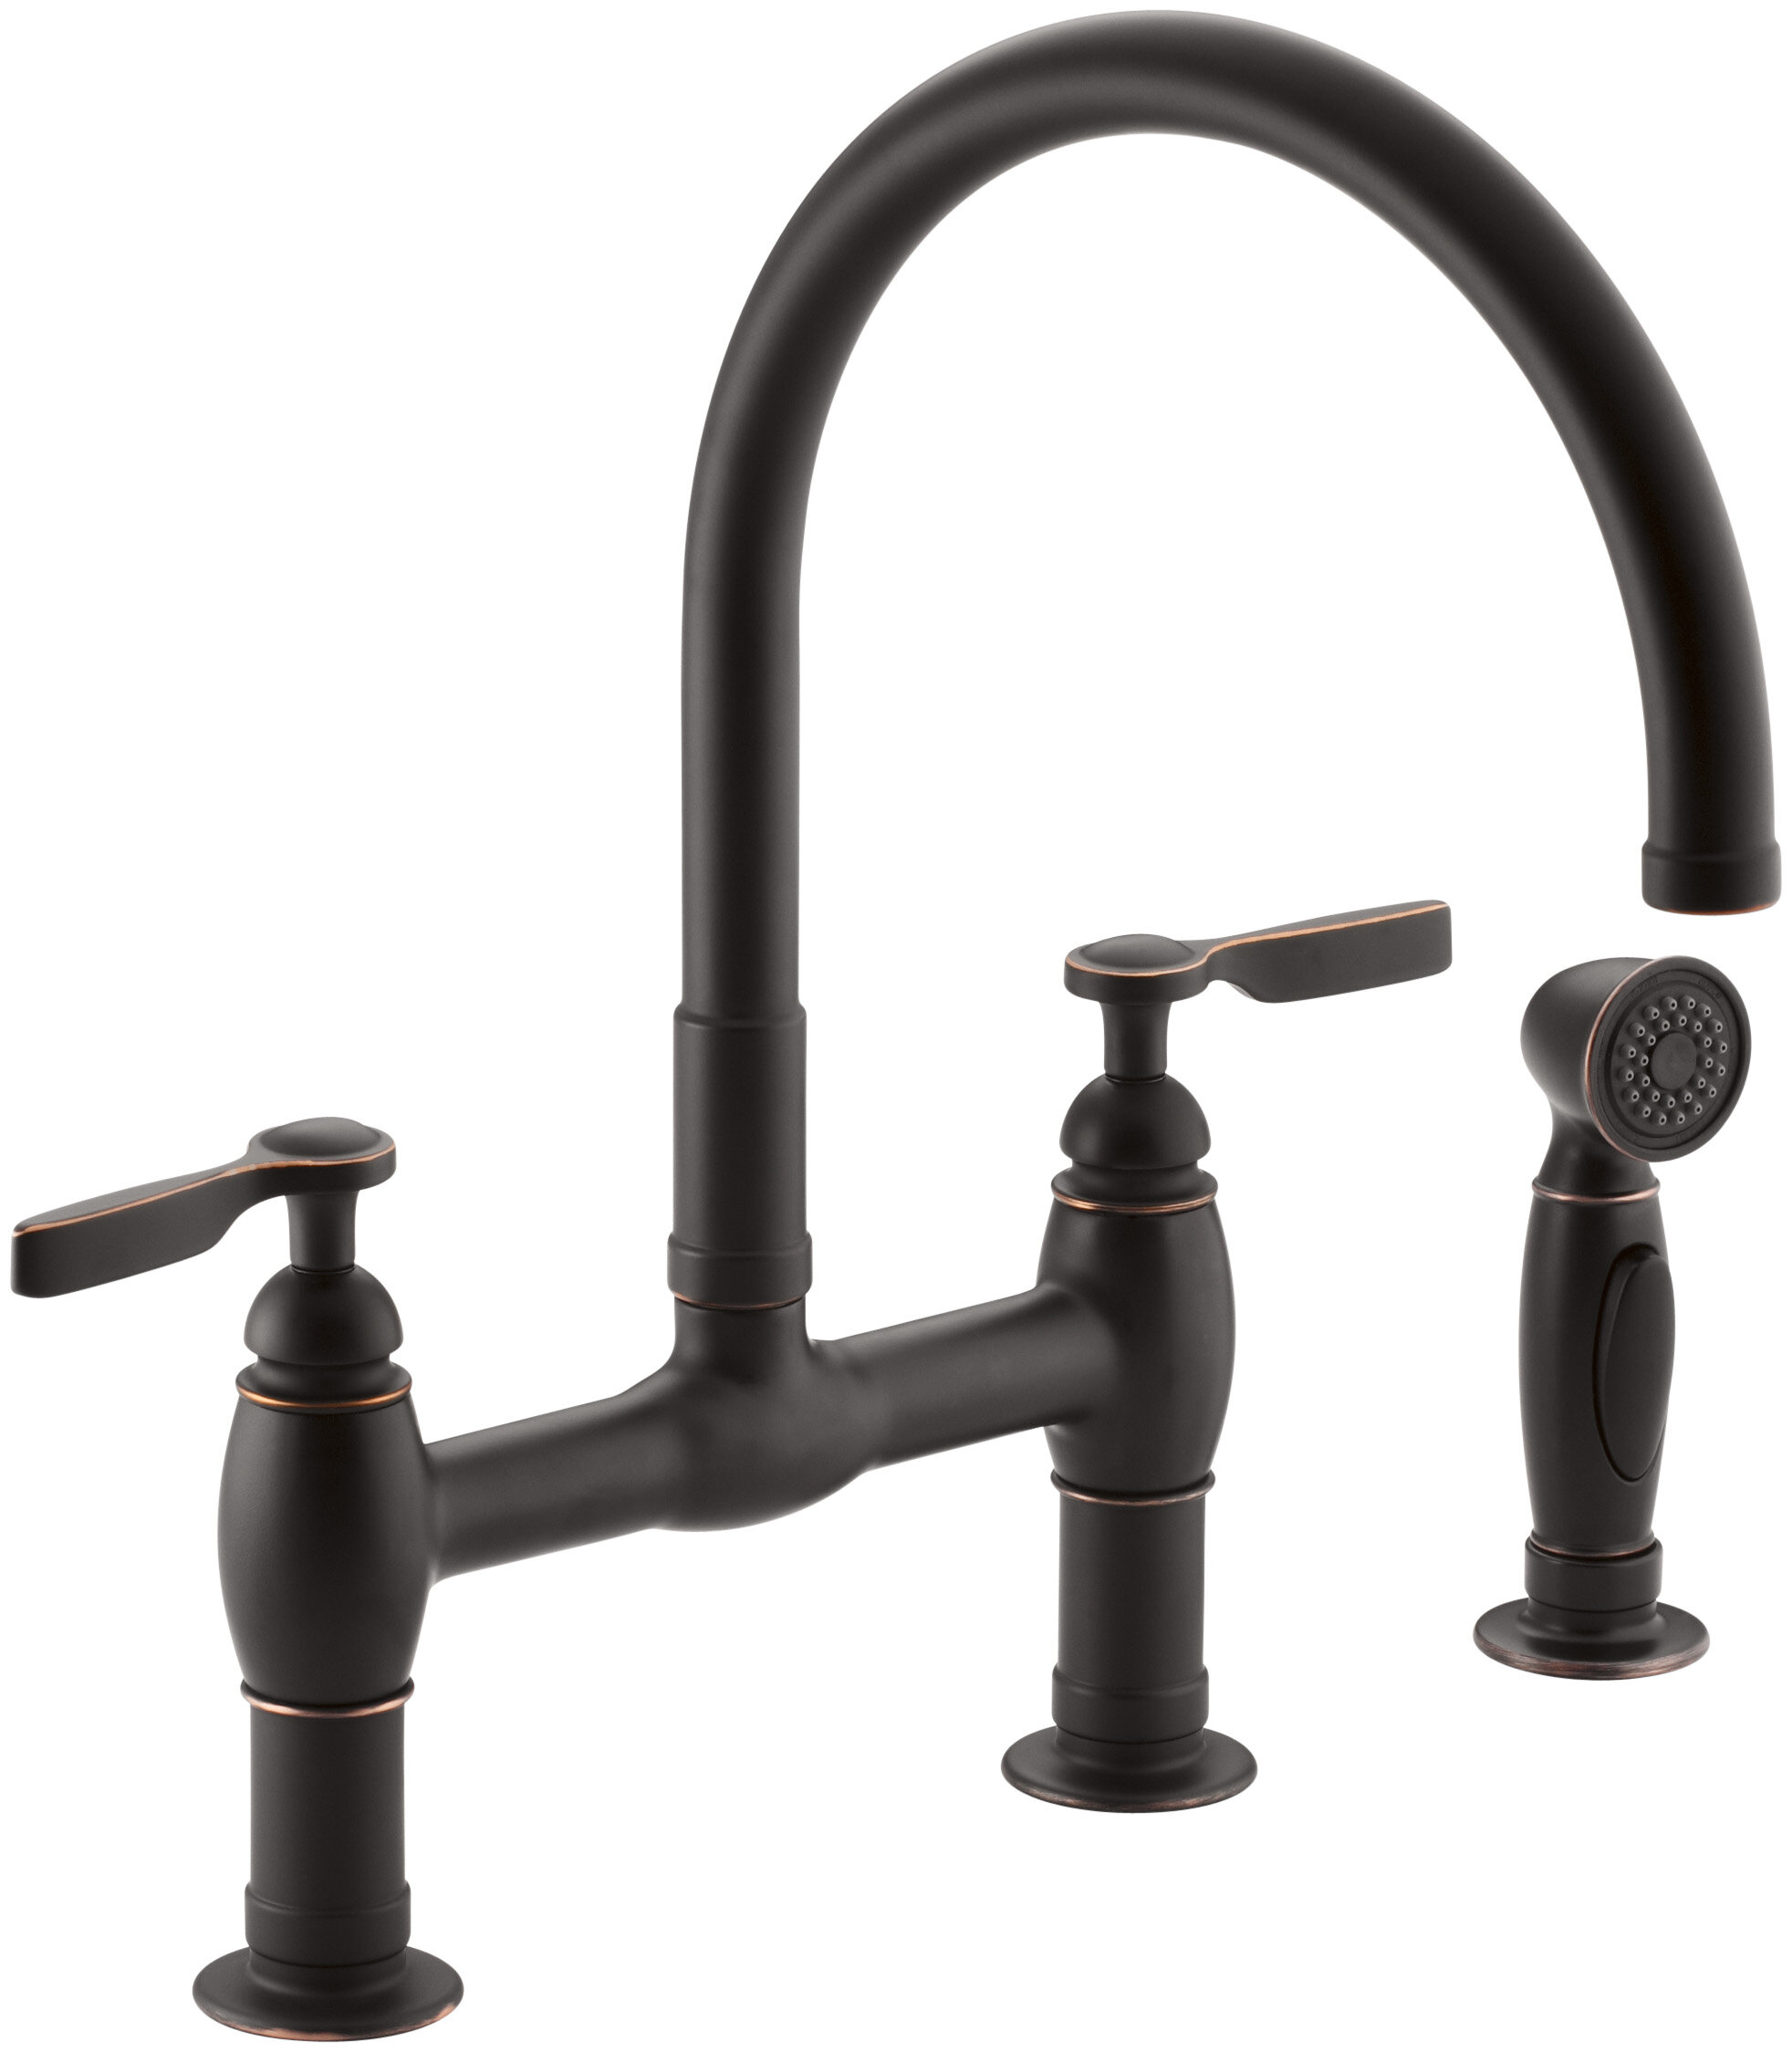 Parq Pull Down Touch Bridge Faucet With Side Spray And Masterclean Reviews Joss Main,Ikea Customer Service Usa Email